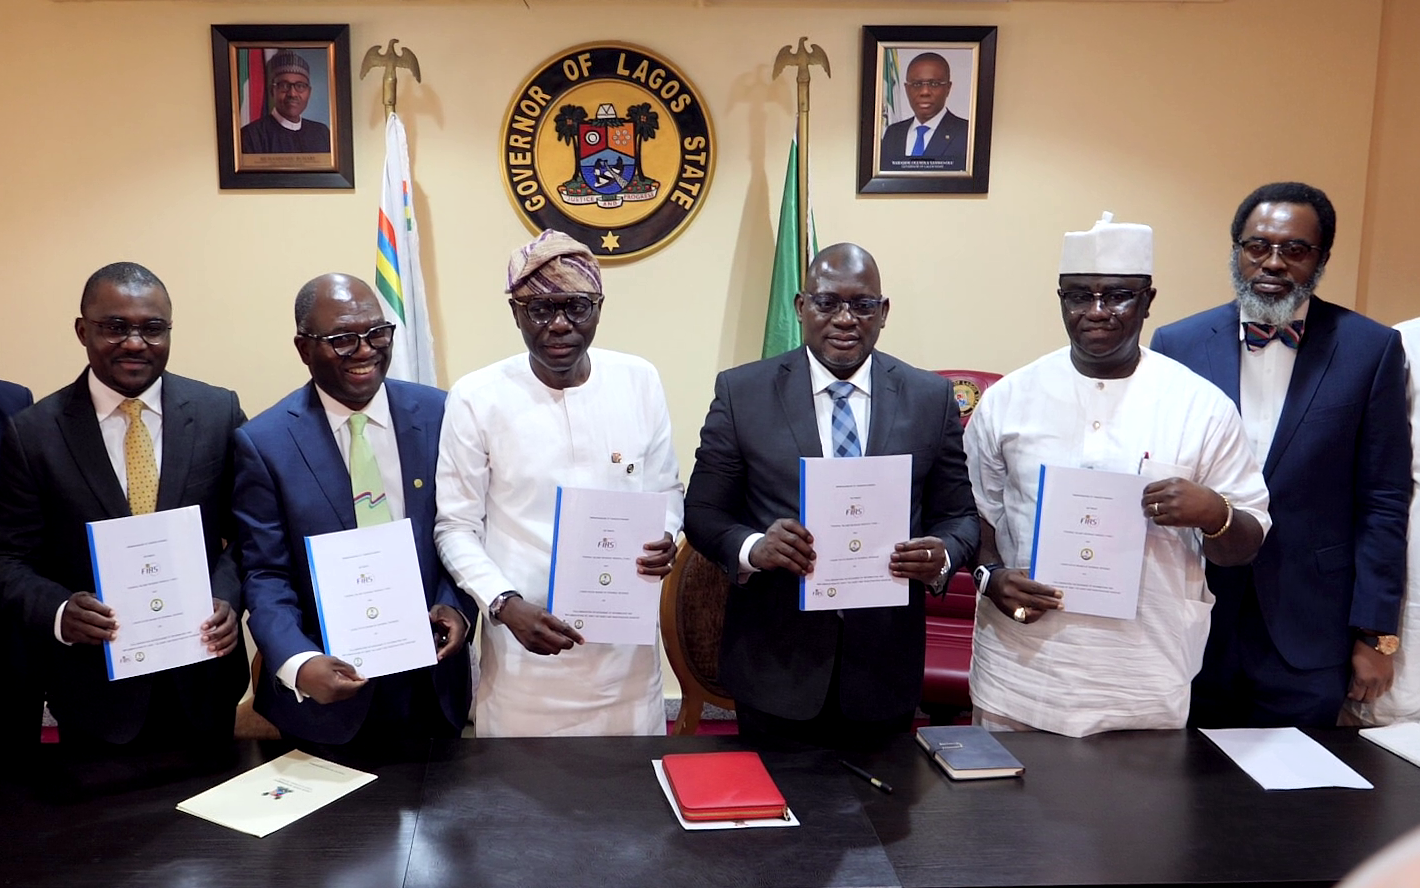 L-R: Lagos State Commissioner for Finance, Dr Rabiu Olowo Onaolapo, Executive Chairman, LIRS, Mr Ayodele Subair, Lagos State Governor, Babajide Sanwo-Olu, Executive Chairman, FIRS, Muhammad Mamman Nami, Minister of State for Finance, Budget and National Planning, Mr Clement Agba and Lagos state Attorney-General & Commissioner for Justice, Mr Moyosore Onigbanjo SAN during the signing of MoU between the Lagos State Internal Revenue Service (LIRS) and Federal Inland Revenue Service (FIRS) held at the Lagos State House, Marina on Monday, February 6, 2023